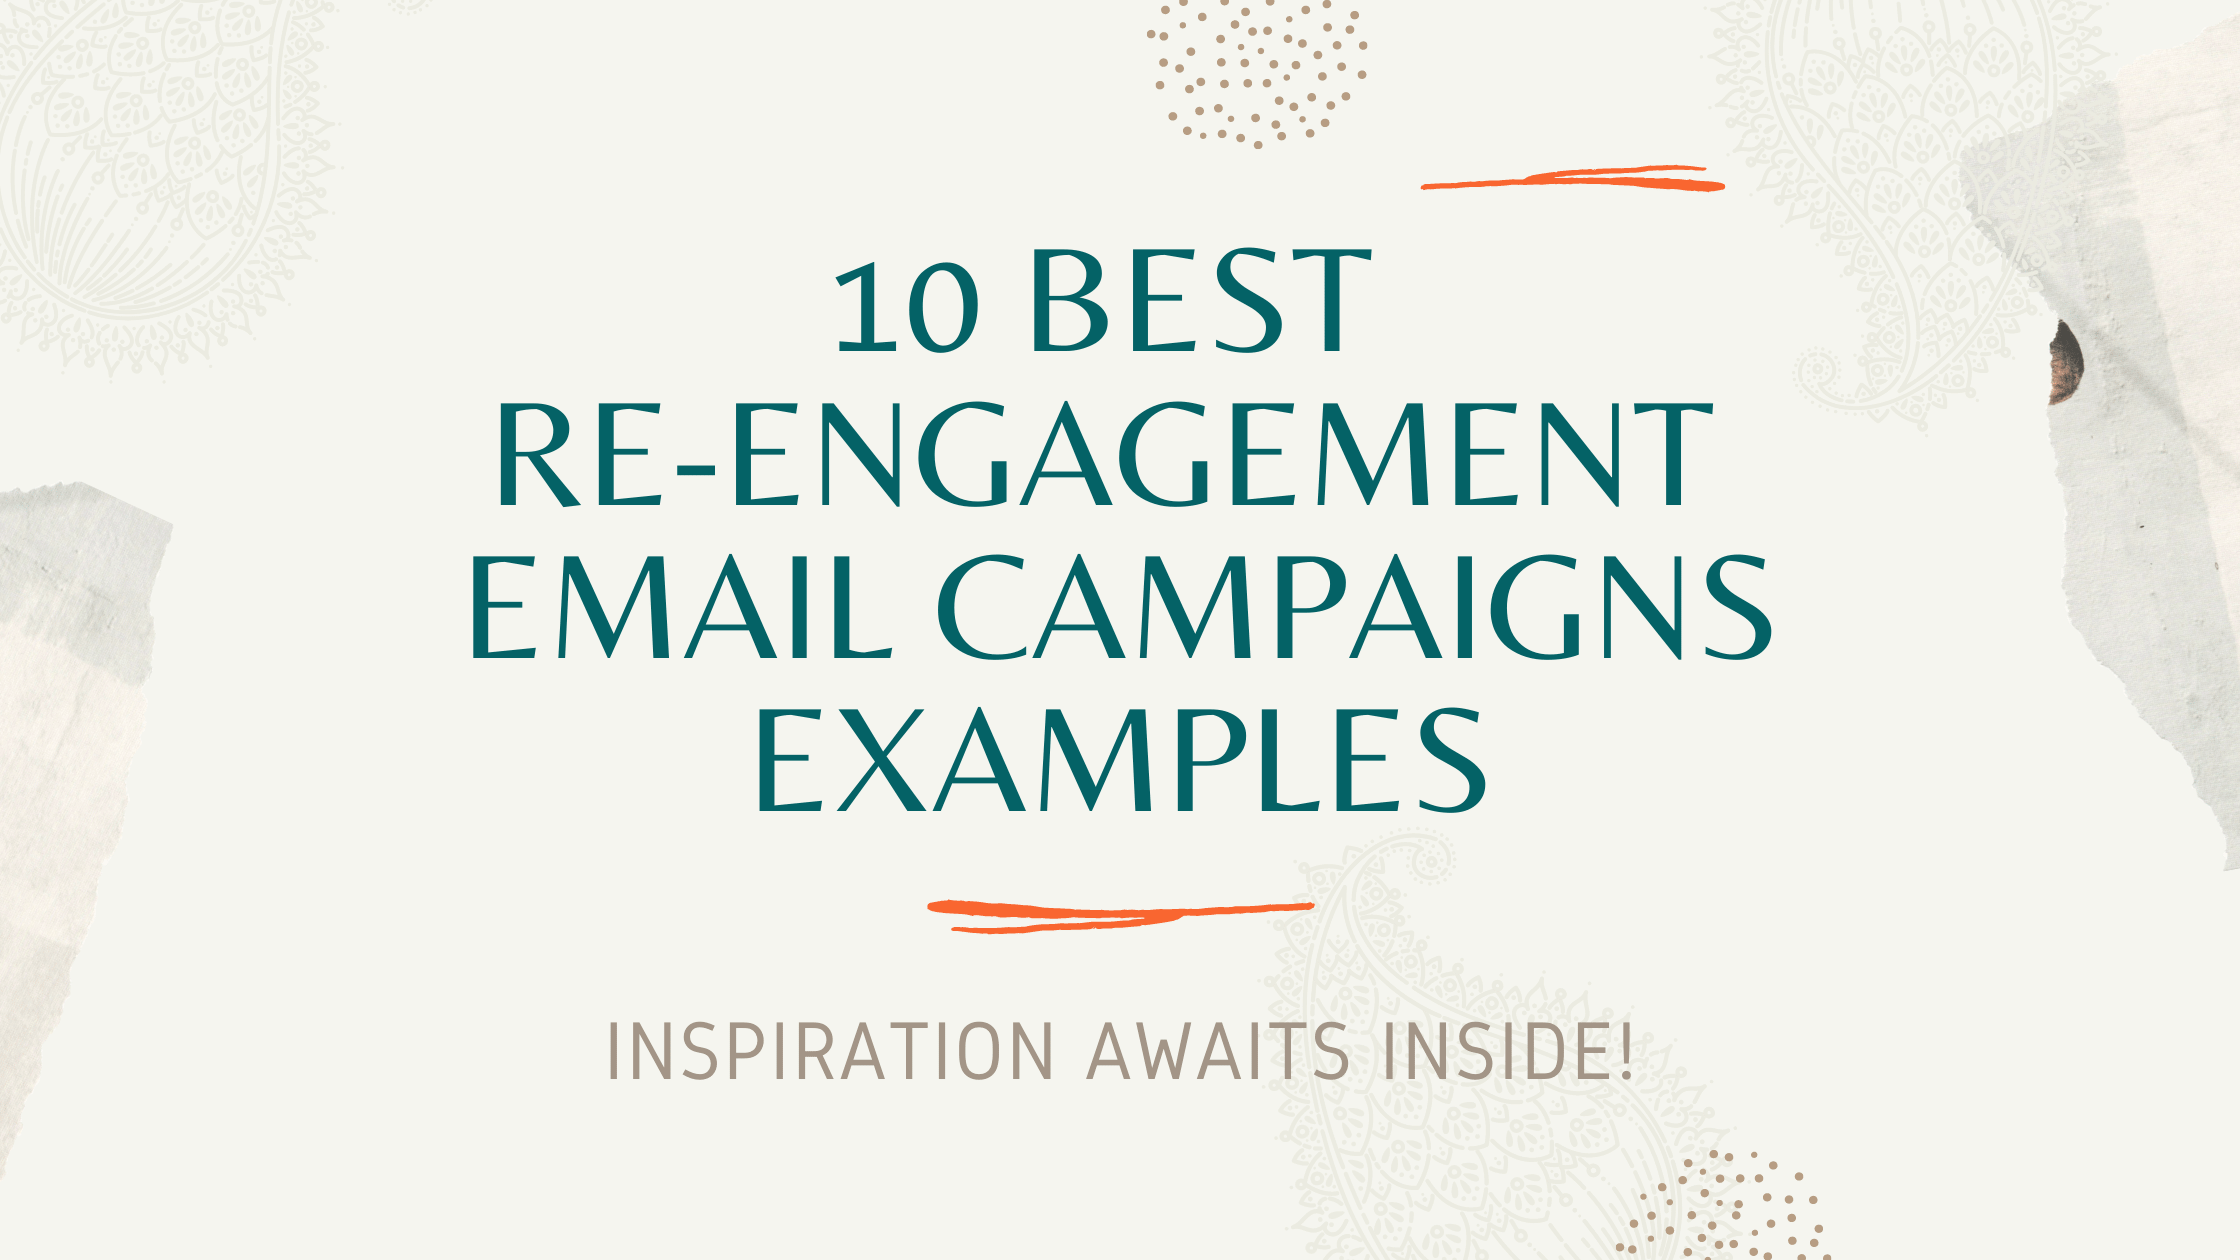 10 Best Re-Engagement Email Campaigns Examples